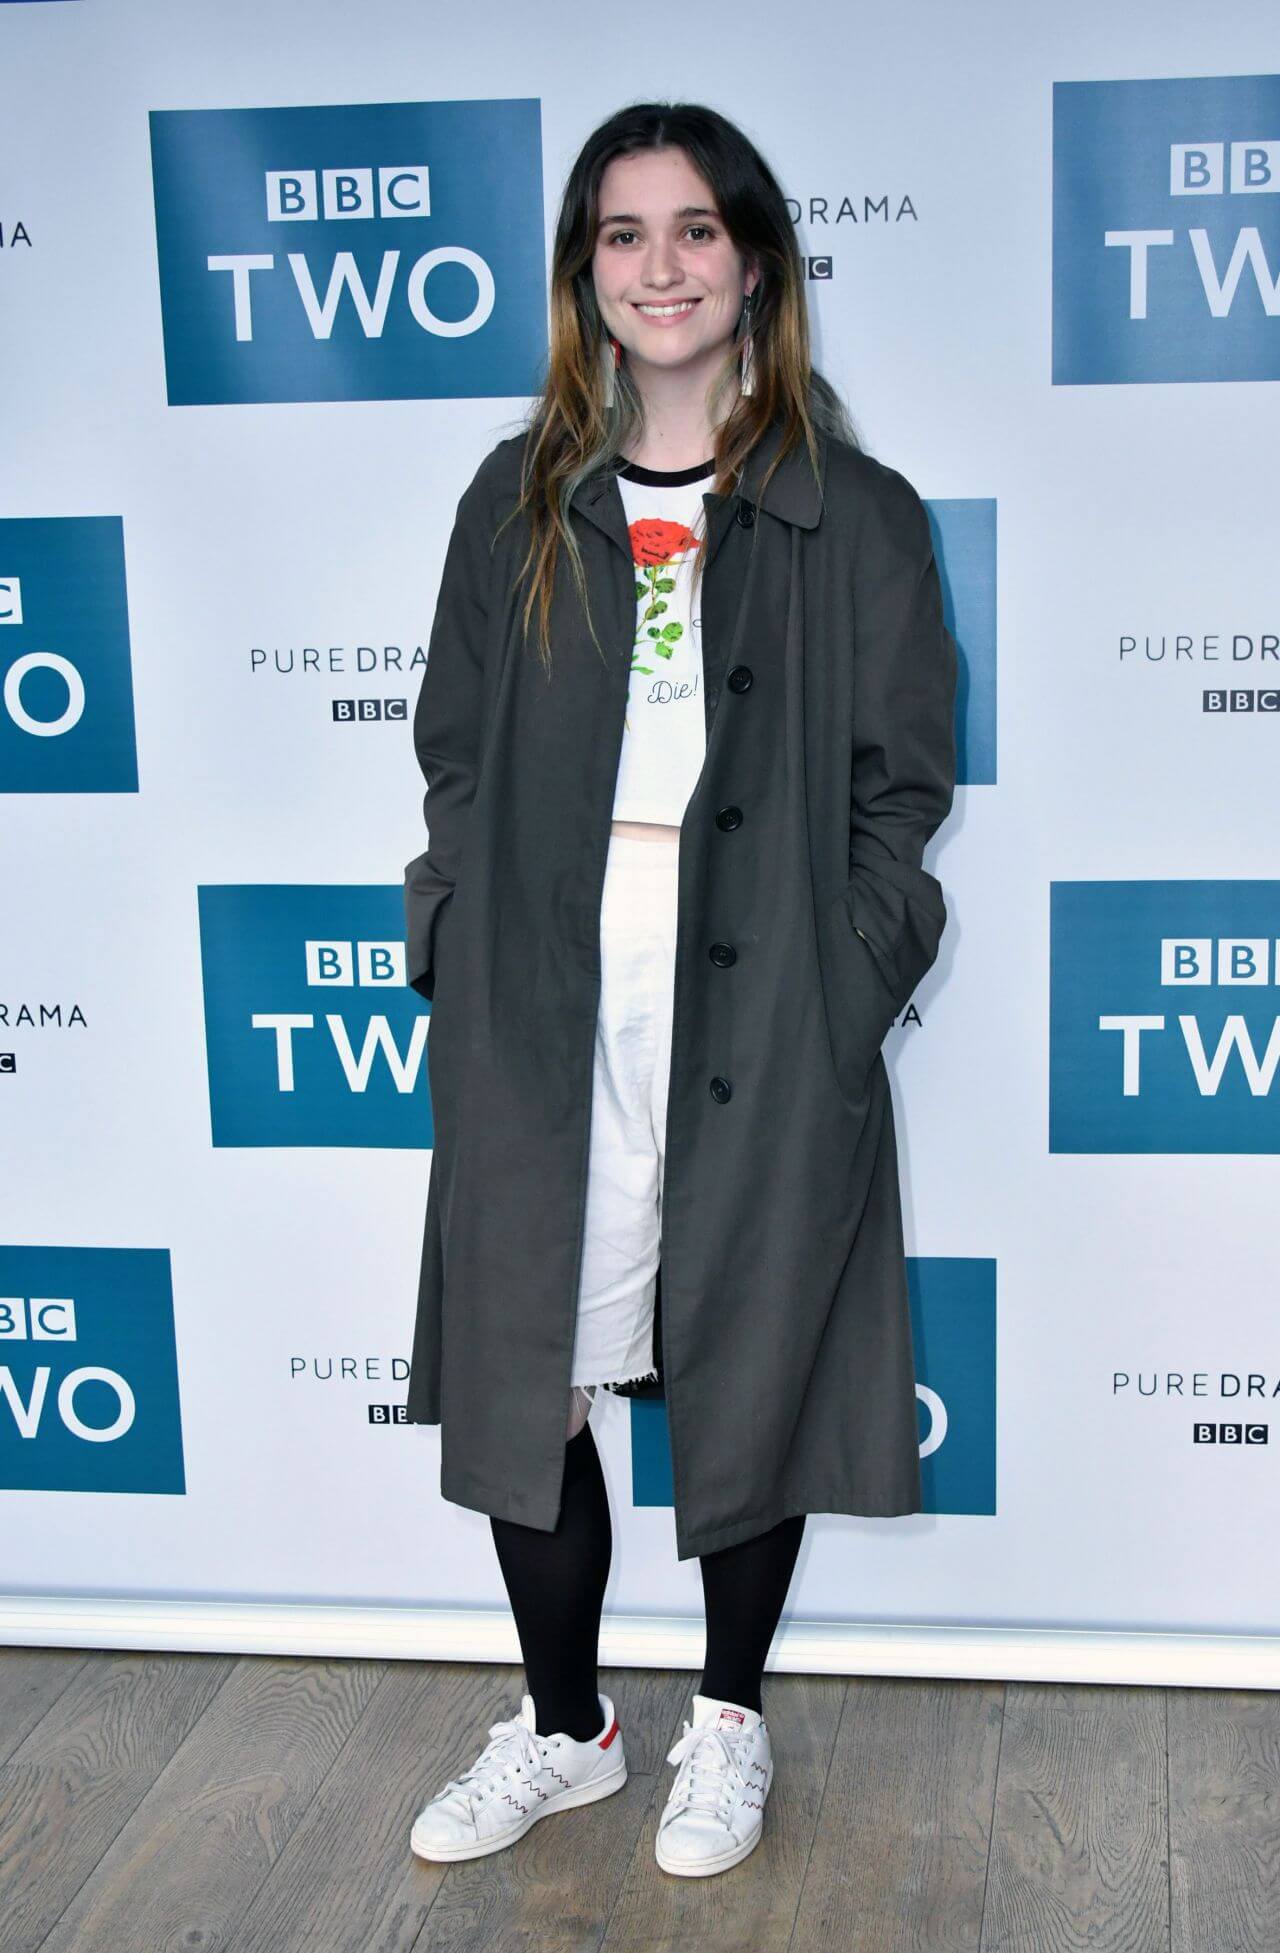 The Chic Factor Alice Englert Served The Ultimate Street Style Look In Her Neutral Co-ord Set